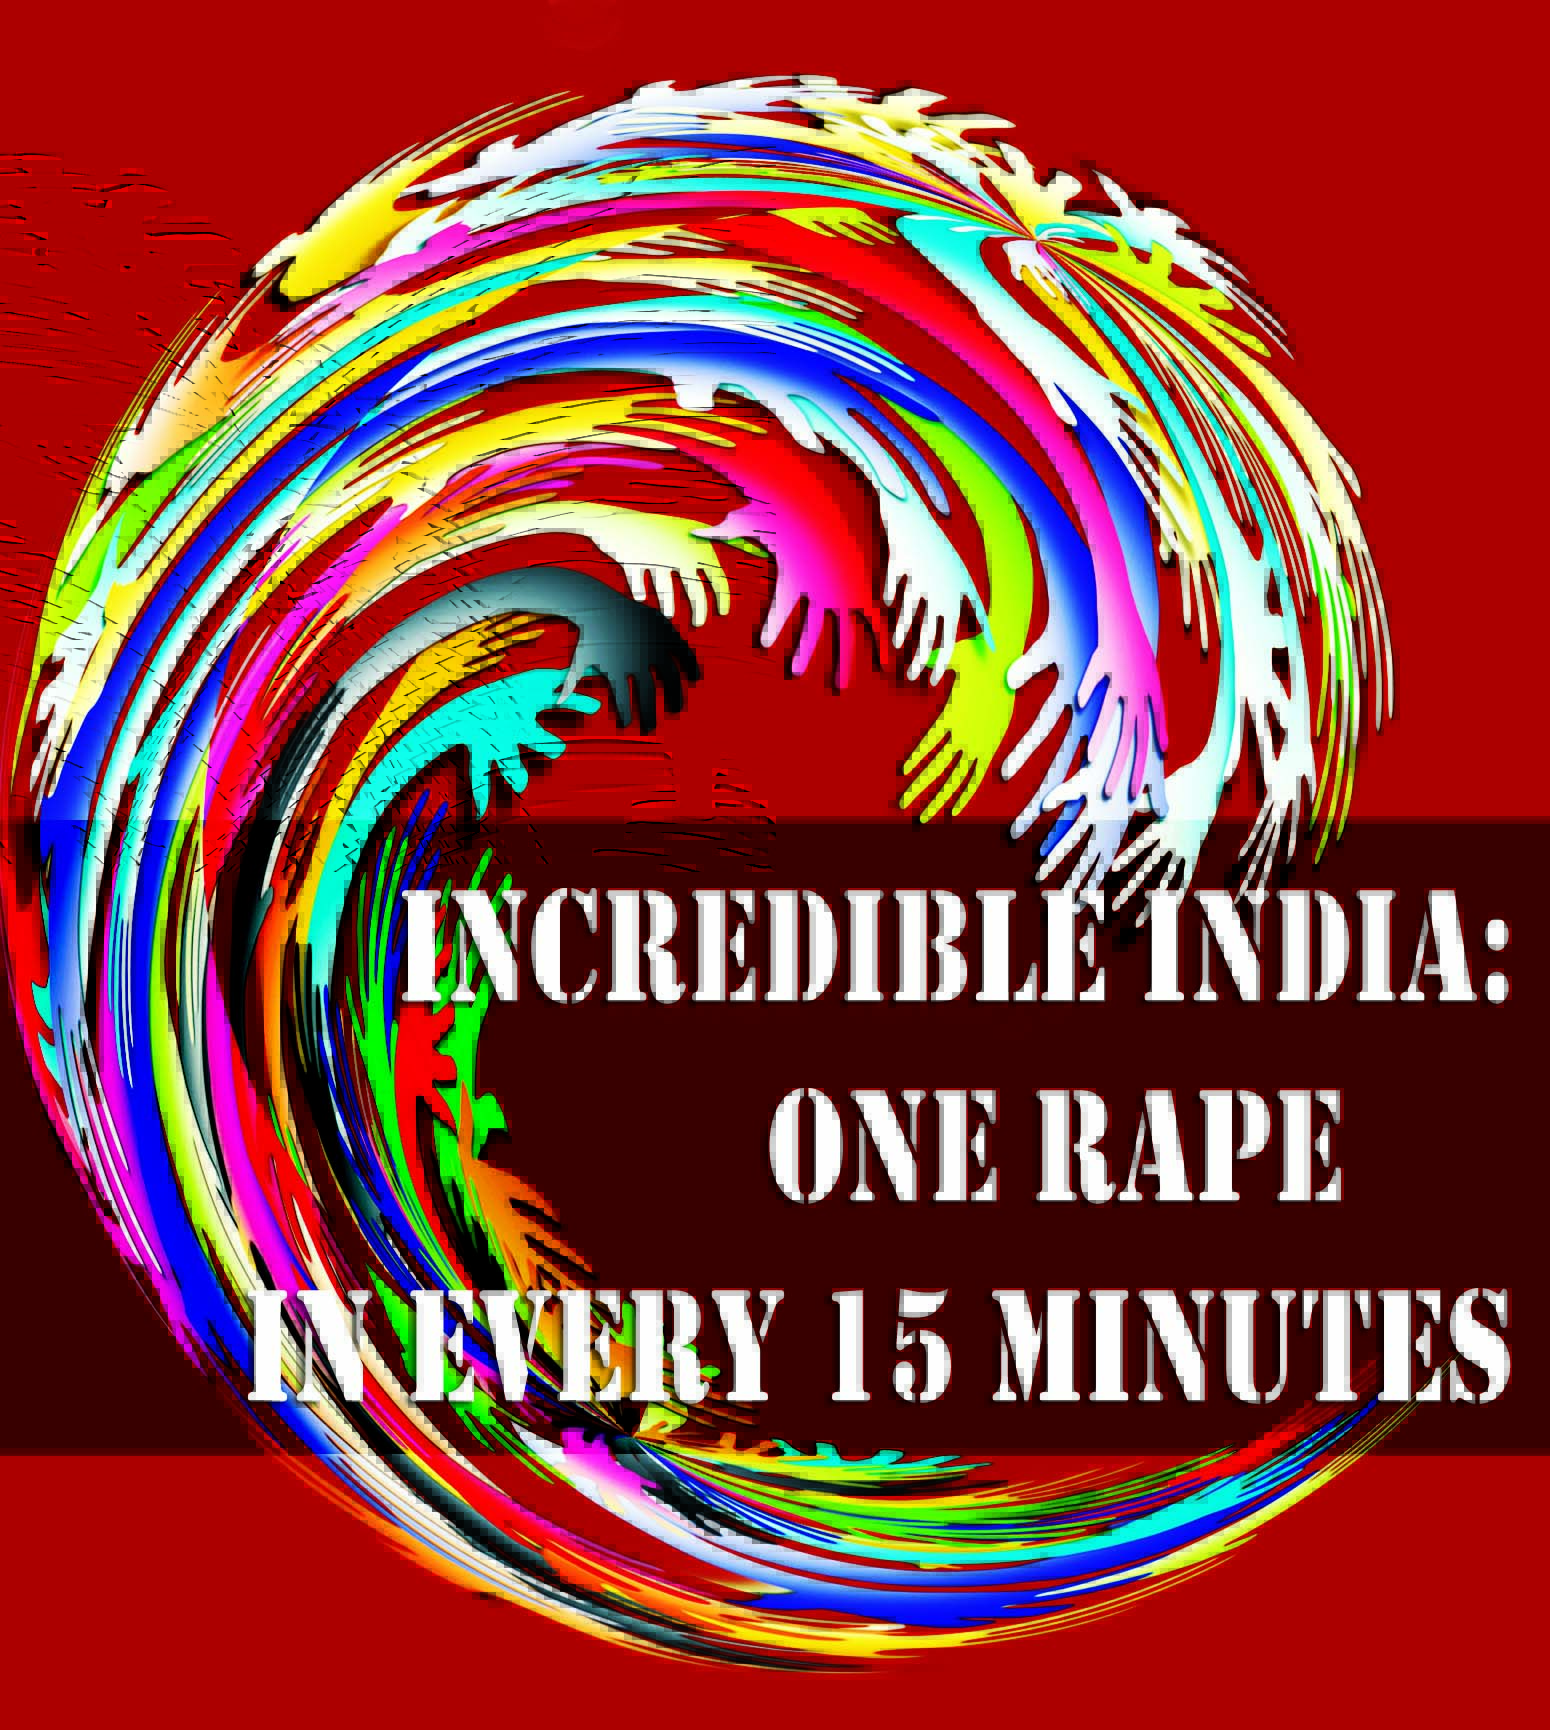 Incredible India: One Rape in every 15 minutes